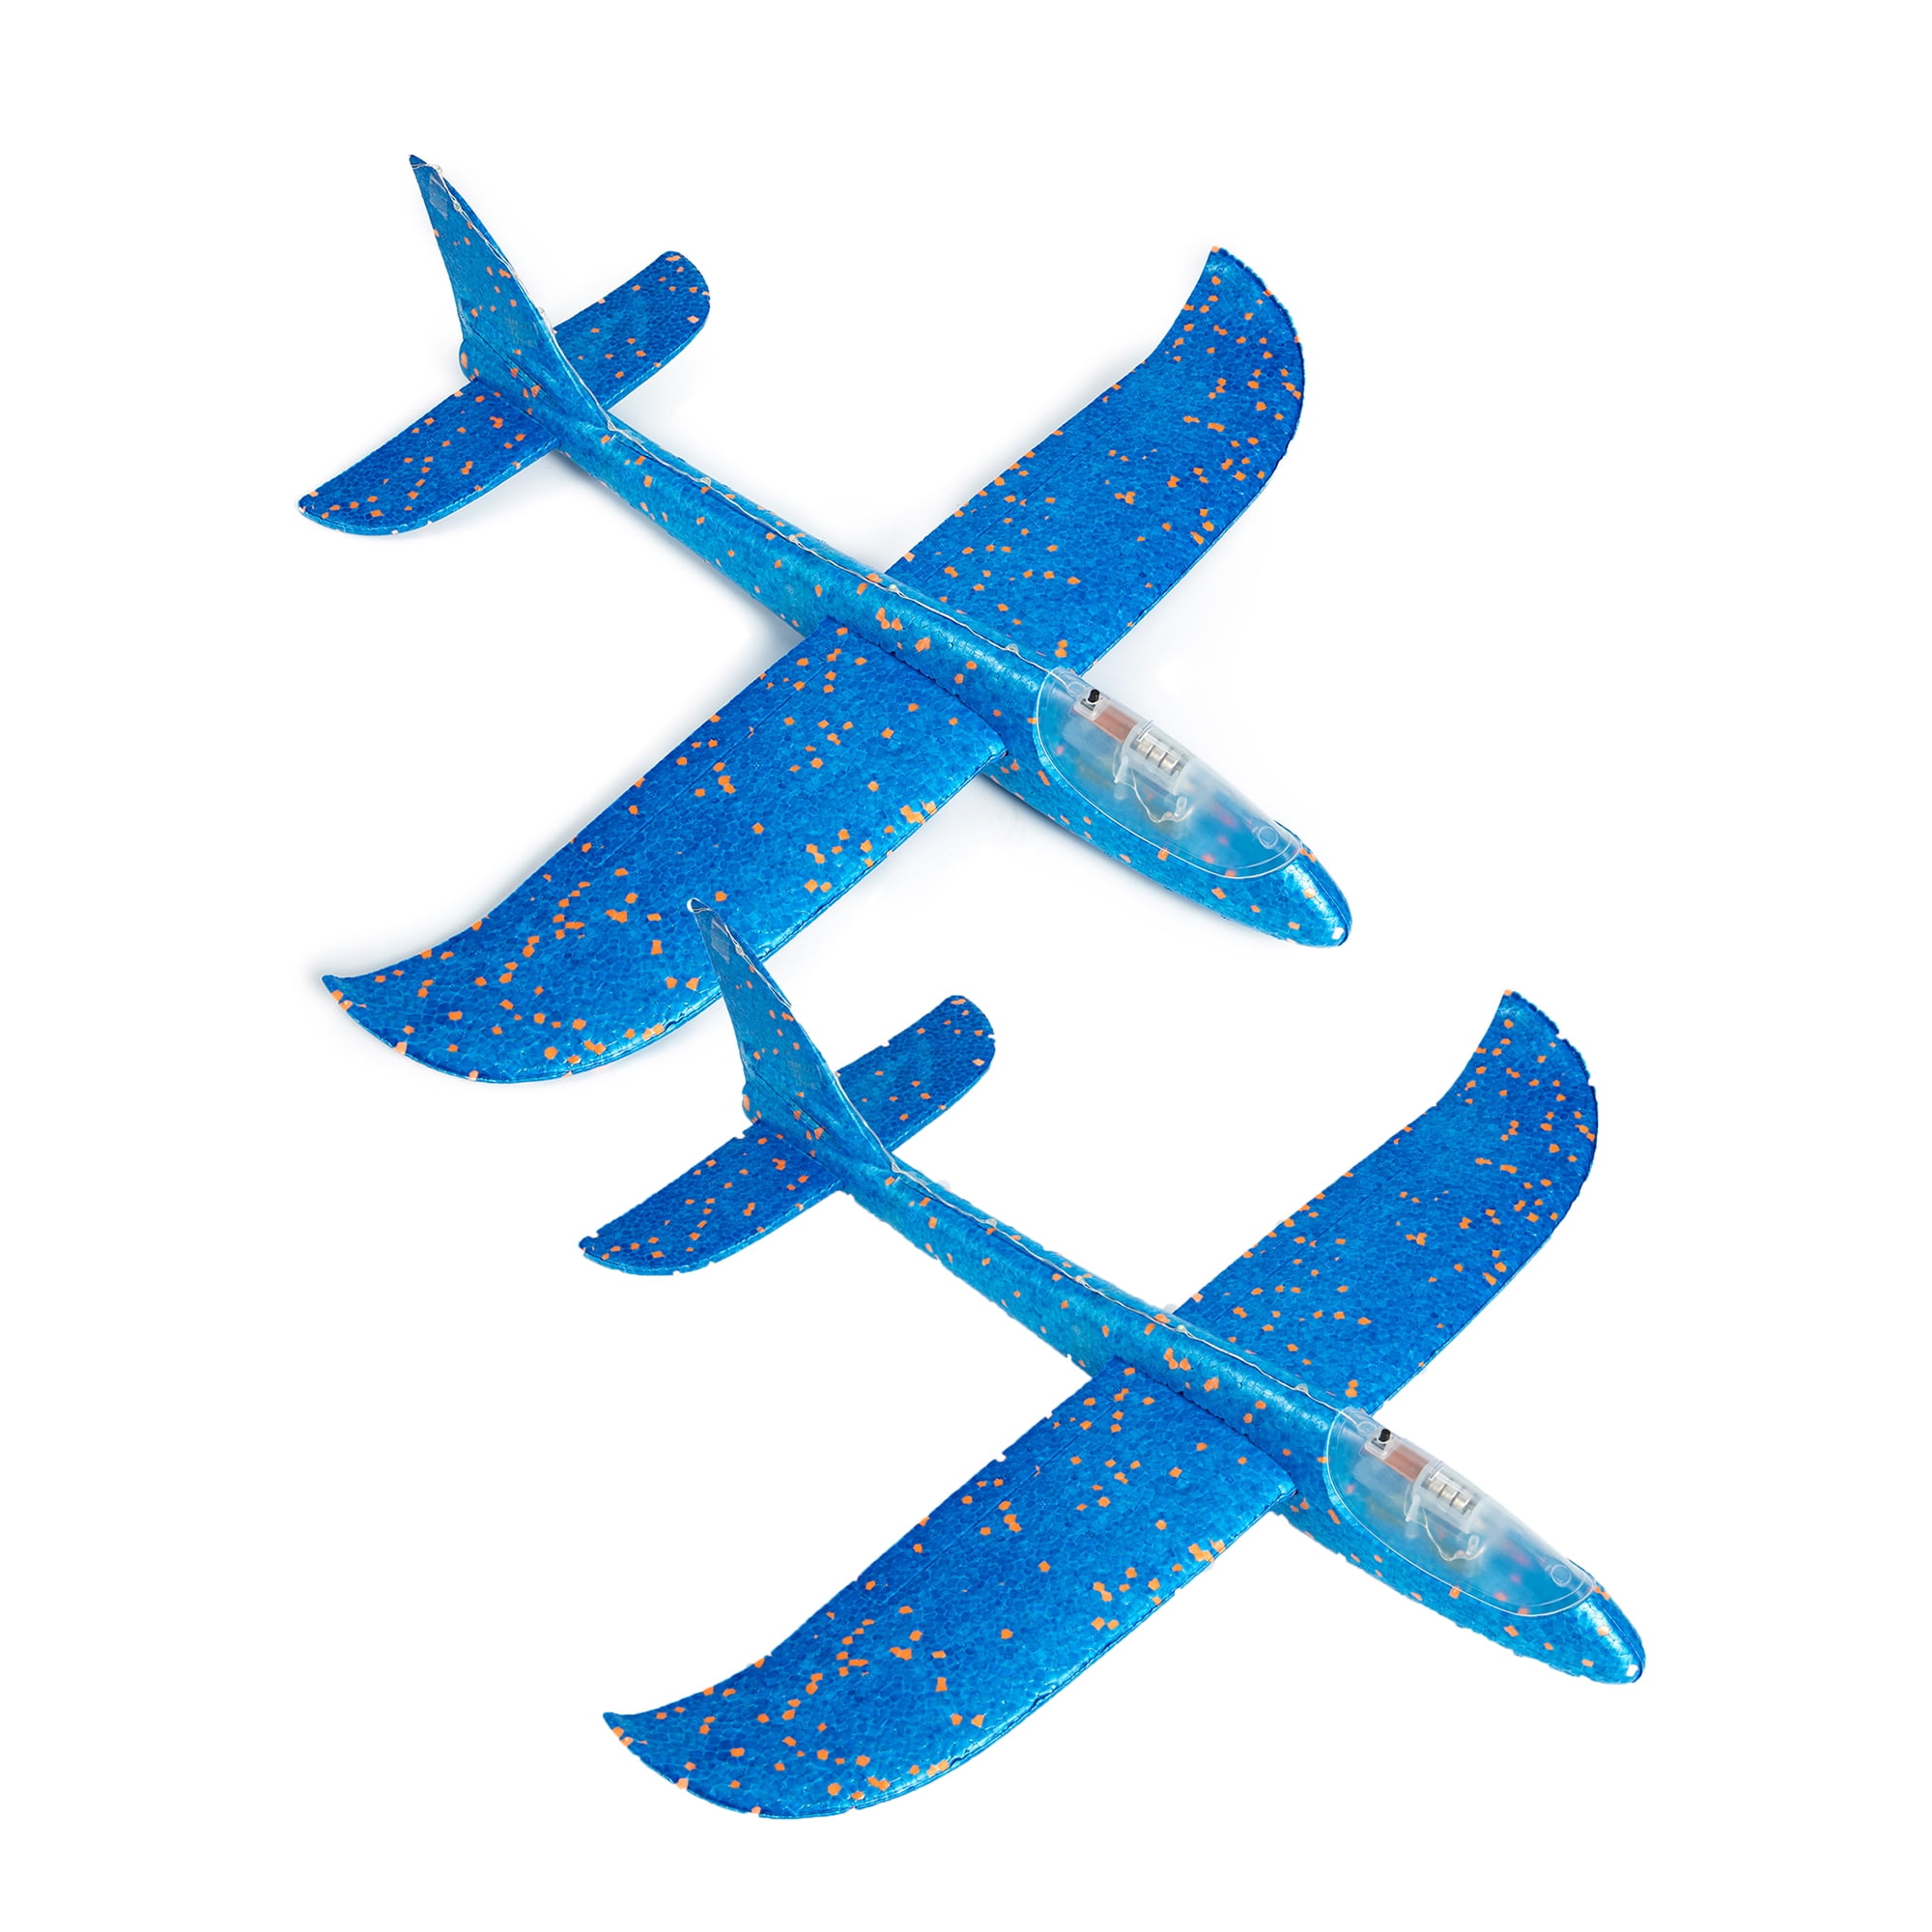 2Pcs EPP Foam Manual Throwing Glider Air Plane Flying Toy Stunt Version Children Educational Toy for Outdoor Toddler Children Boys Girls Gifts Throw Glider Toy Blue